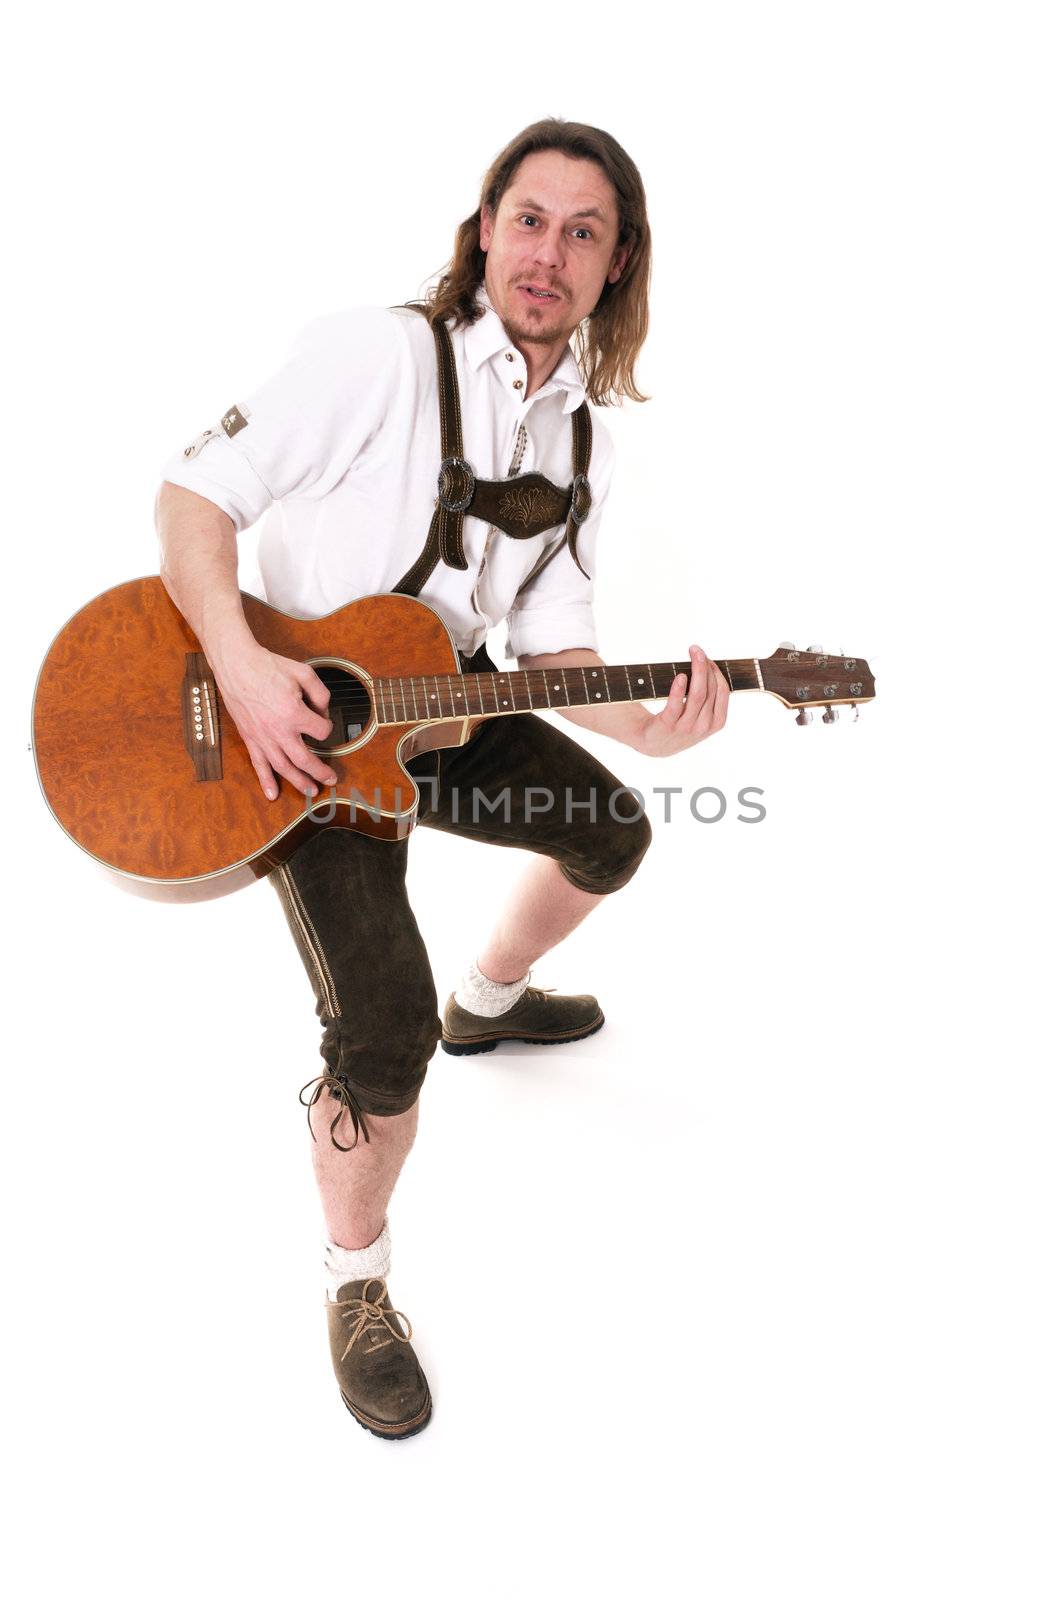 Young bavarian muscian in traditional costume playing guitar